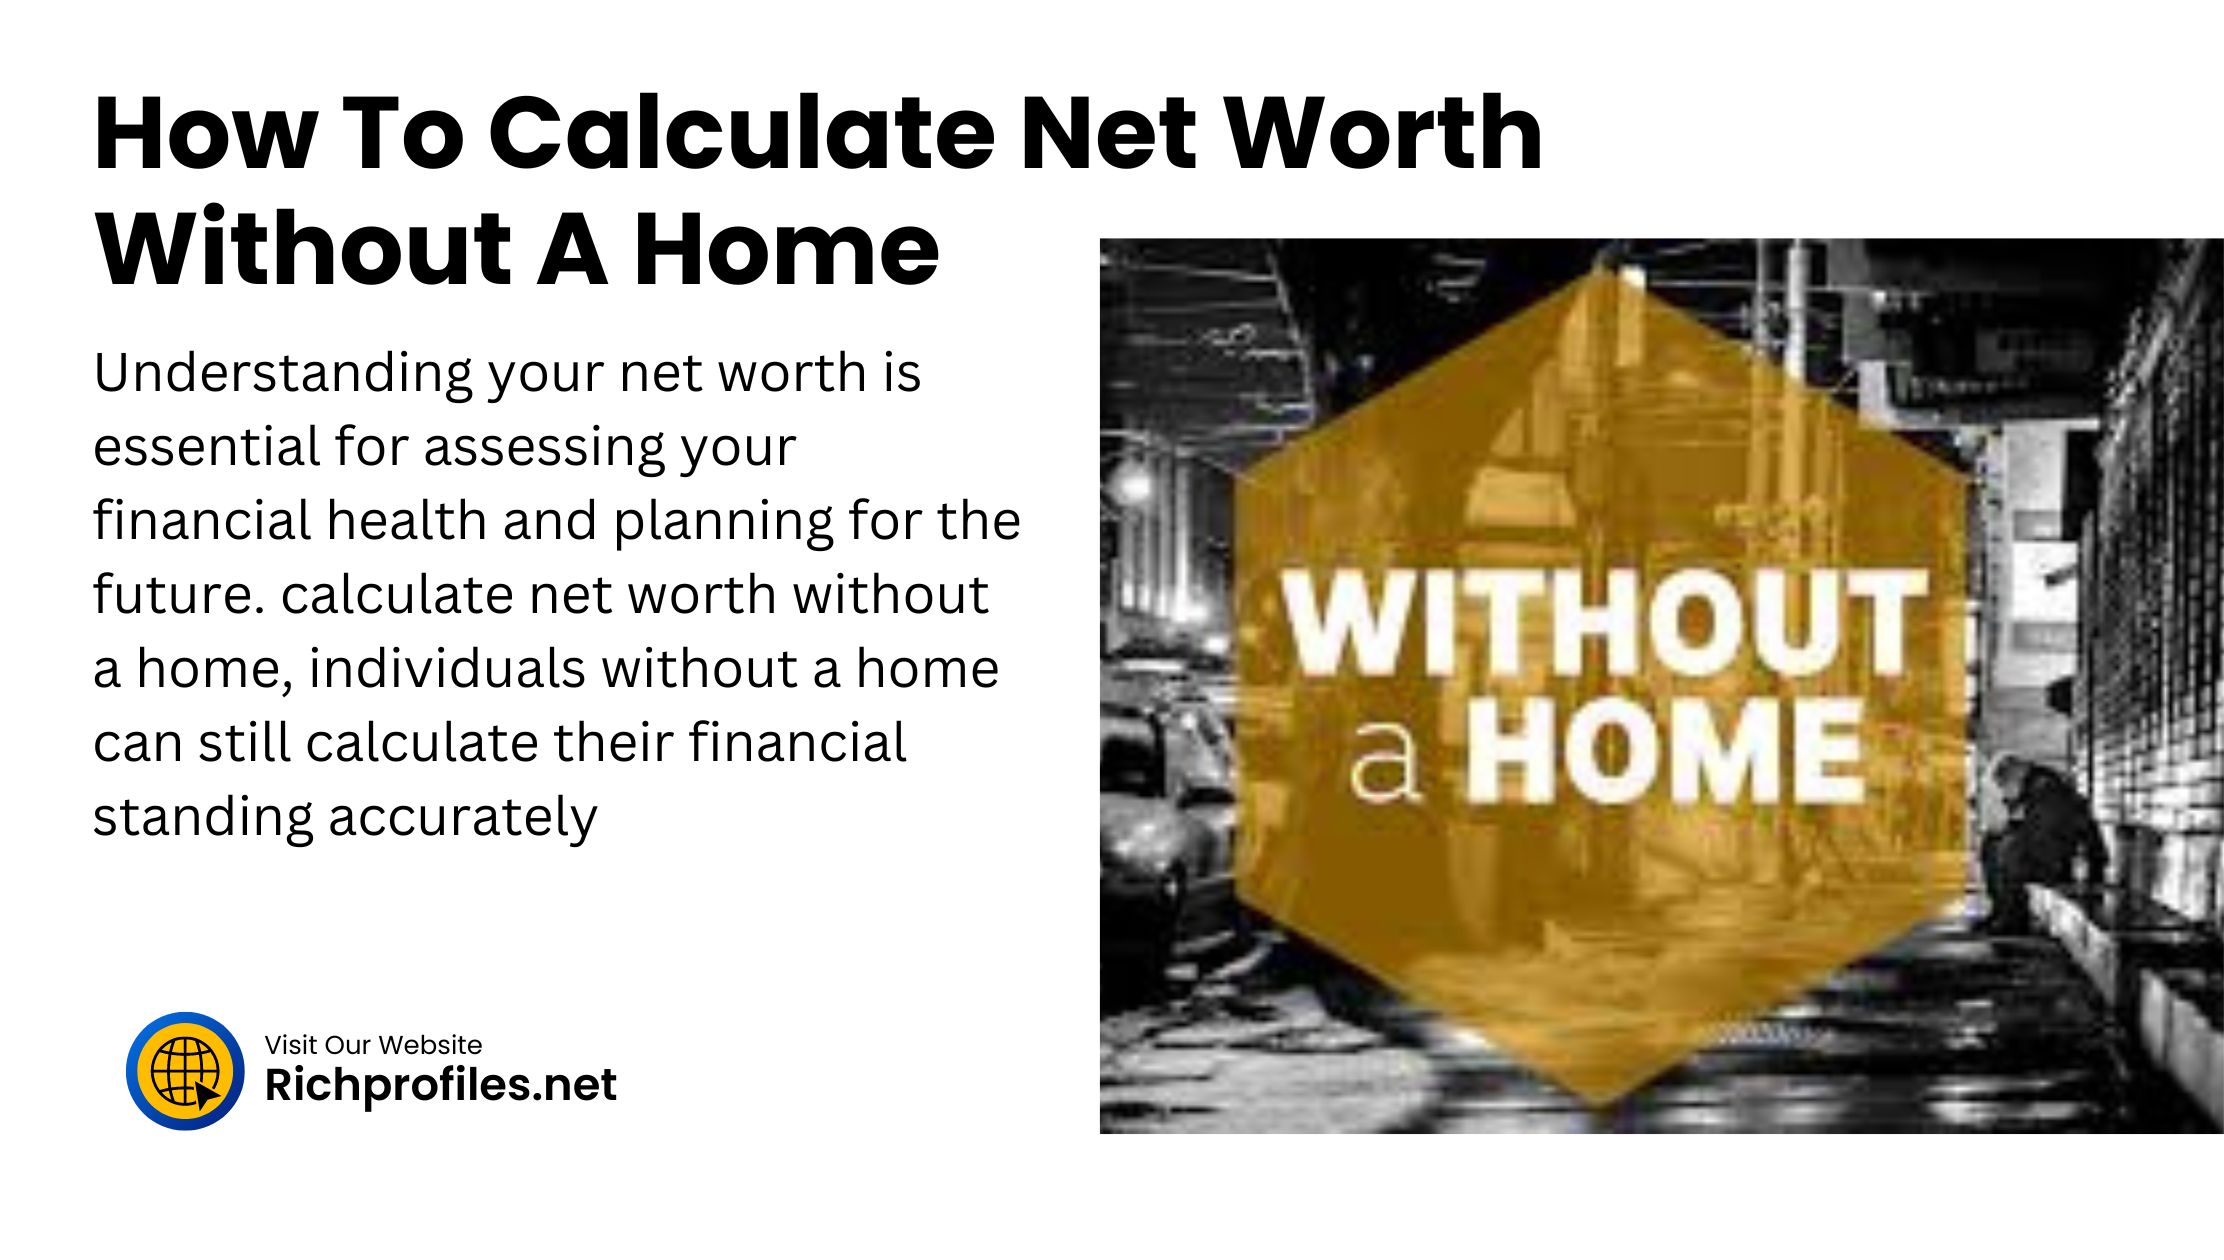 How To Calculate Net Worth Without A Home